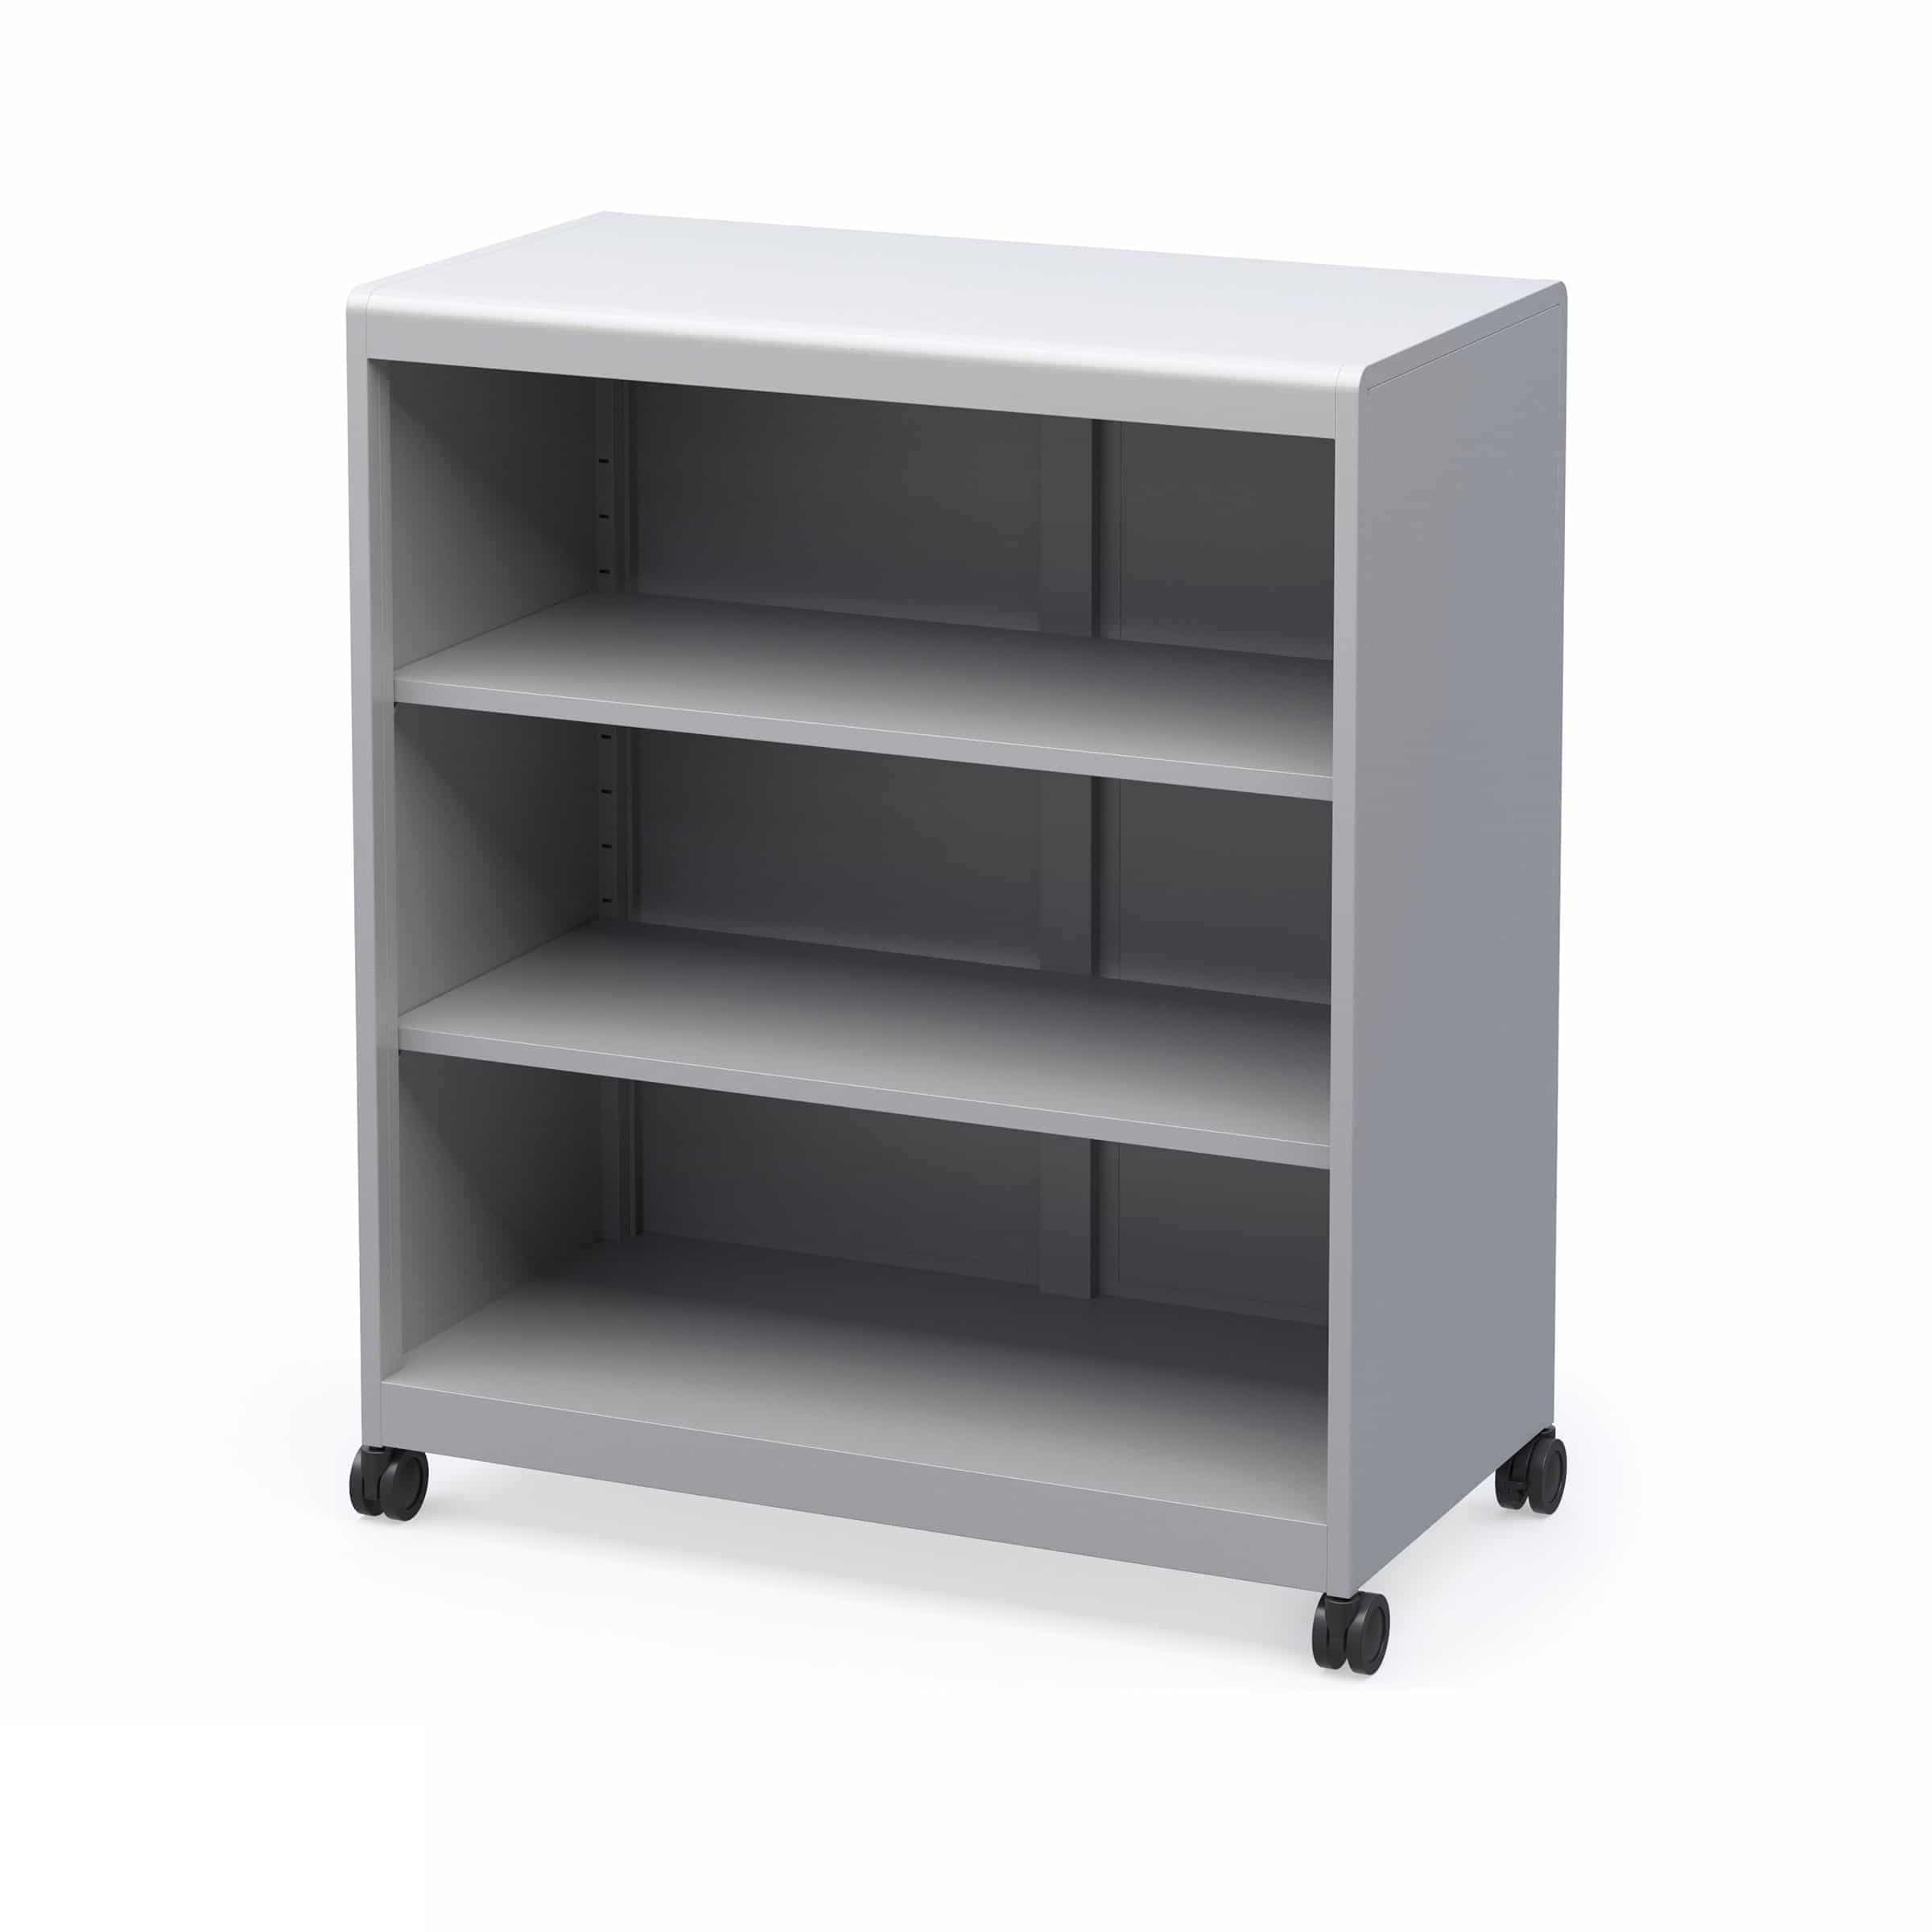 Voyager Short Storage Cart with Shelves - Three Quarter View